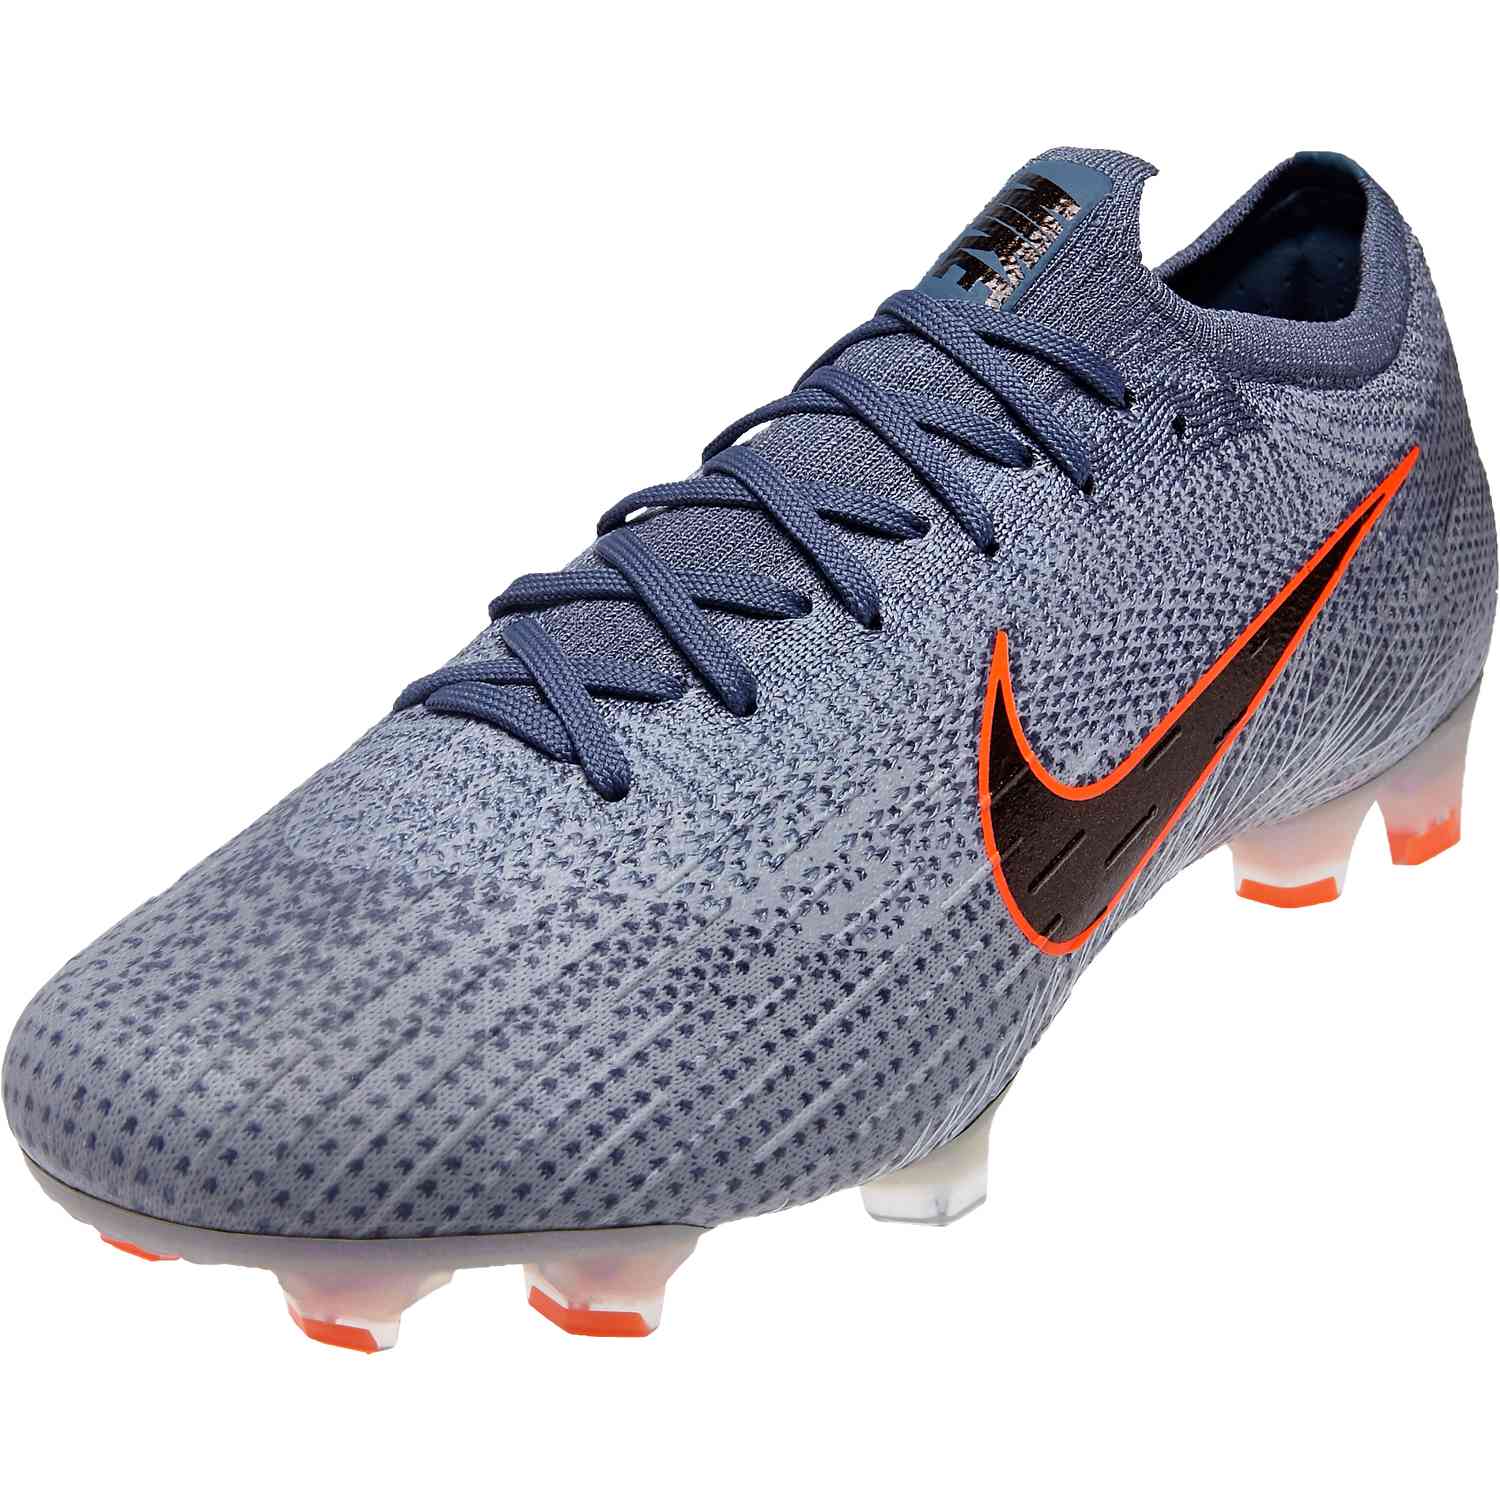 Nike Magista Obra 2 Club FG Soccer Cleats, Features Justdial